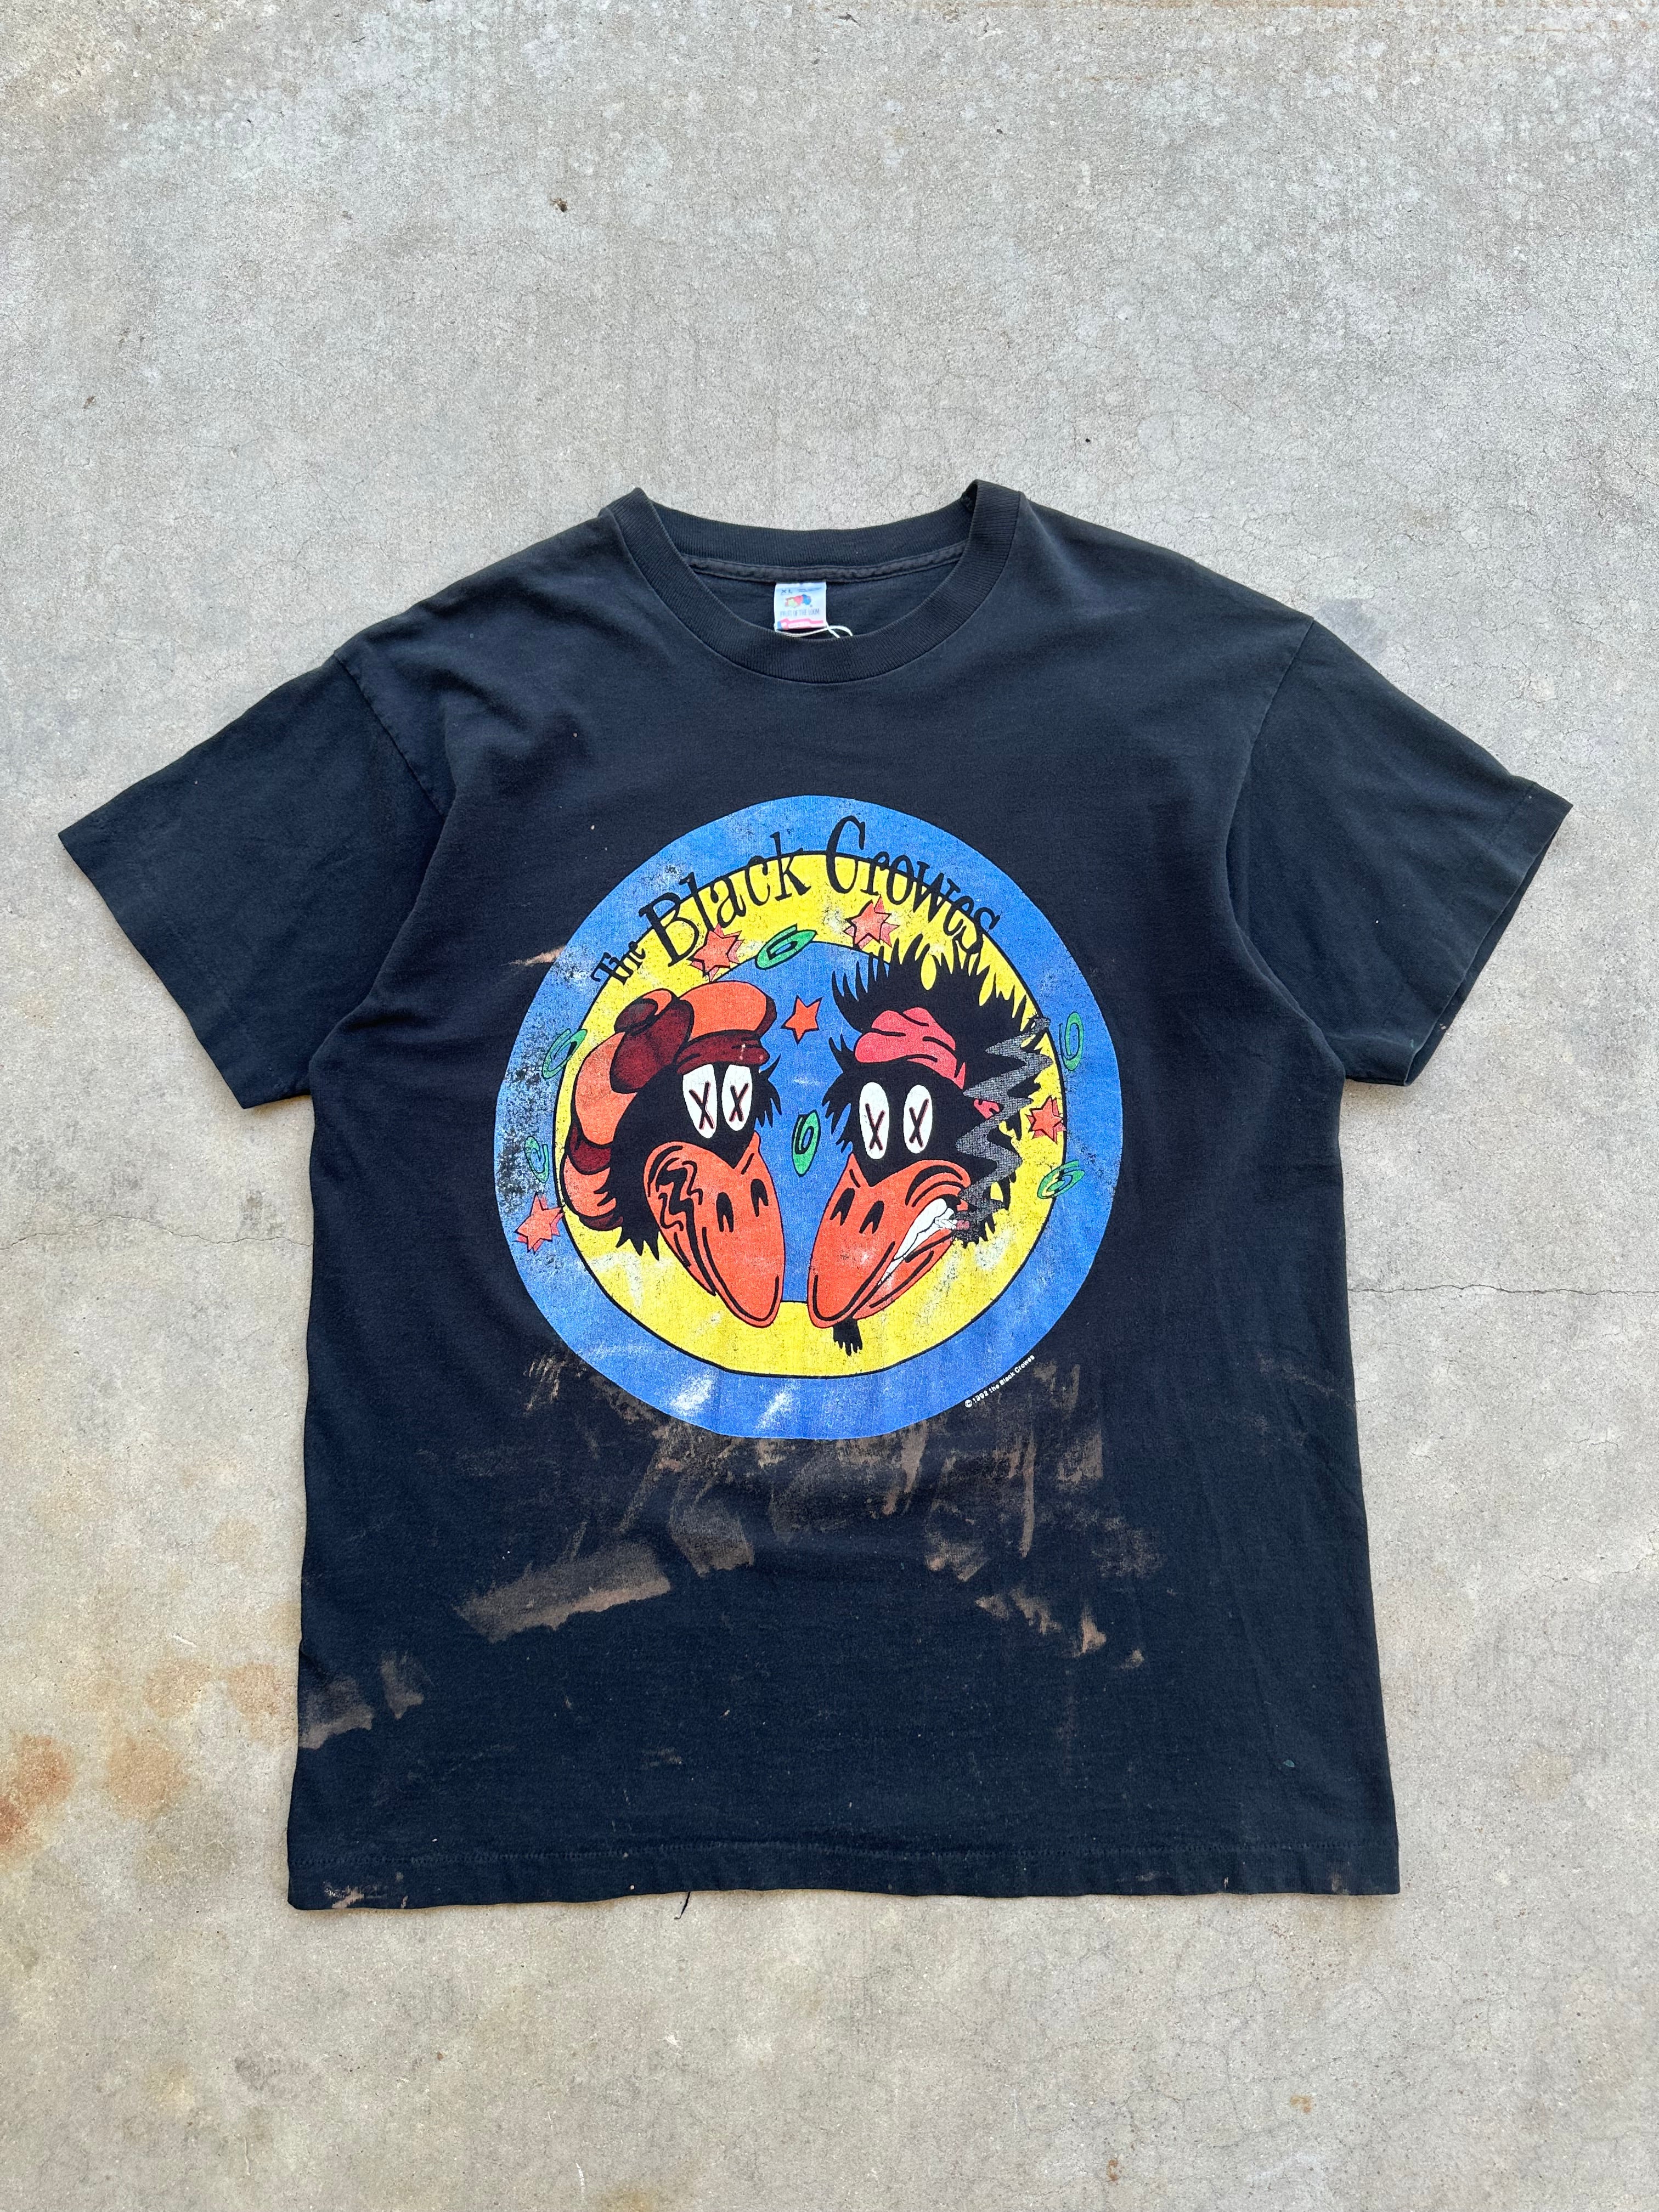 1992 The Black Crowes “High as The Moon” Tour T-shirt (XL)